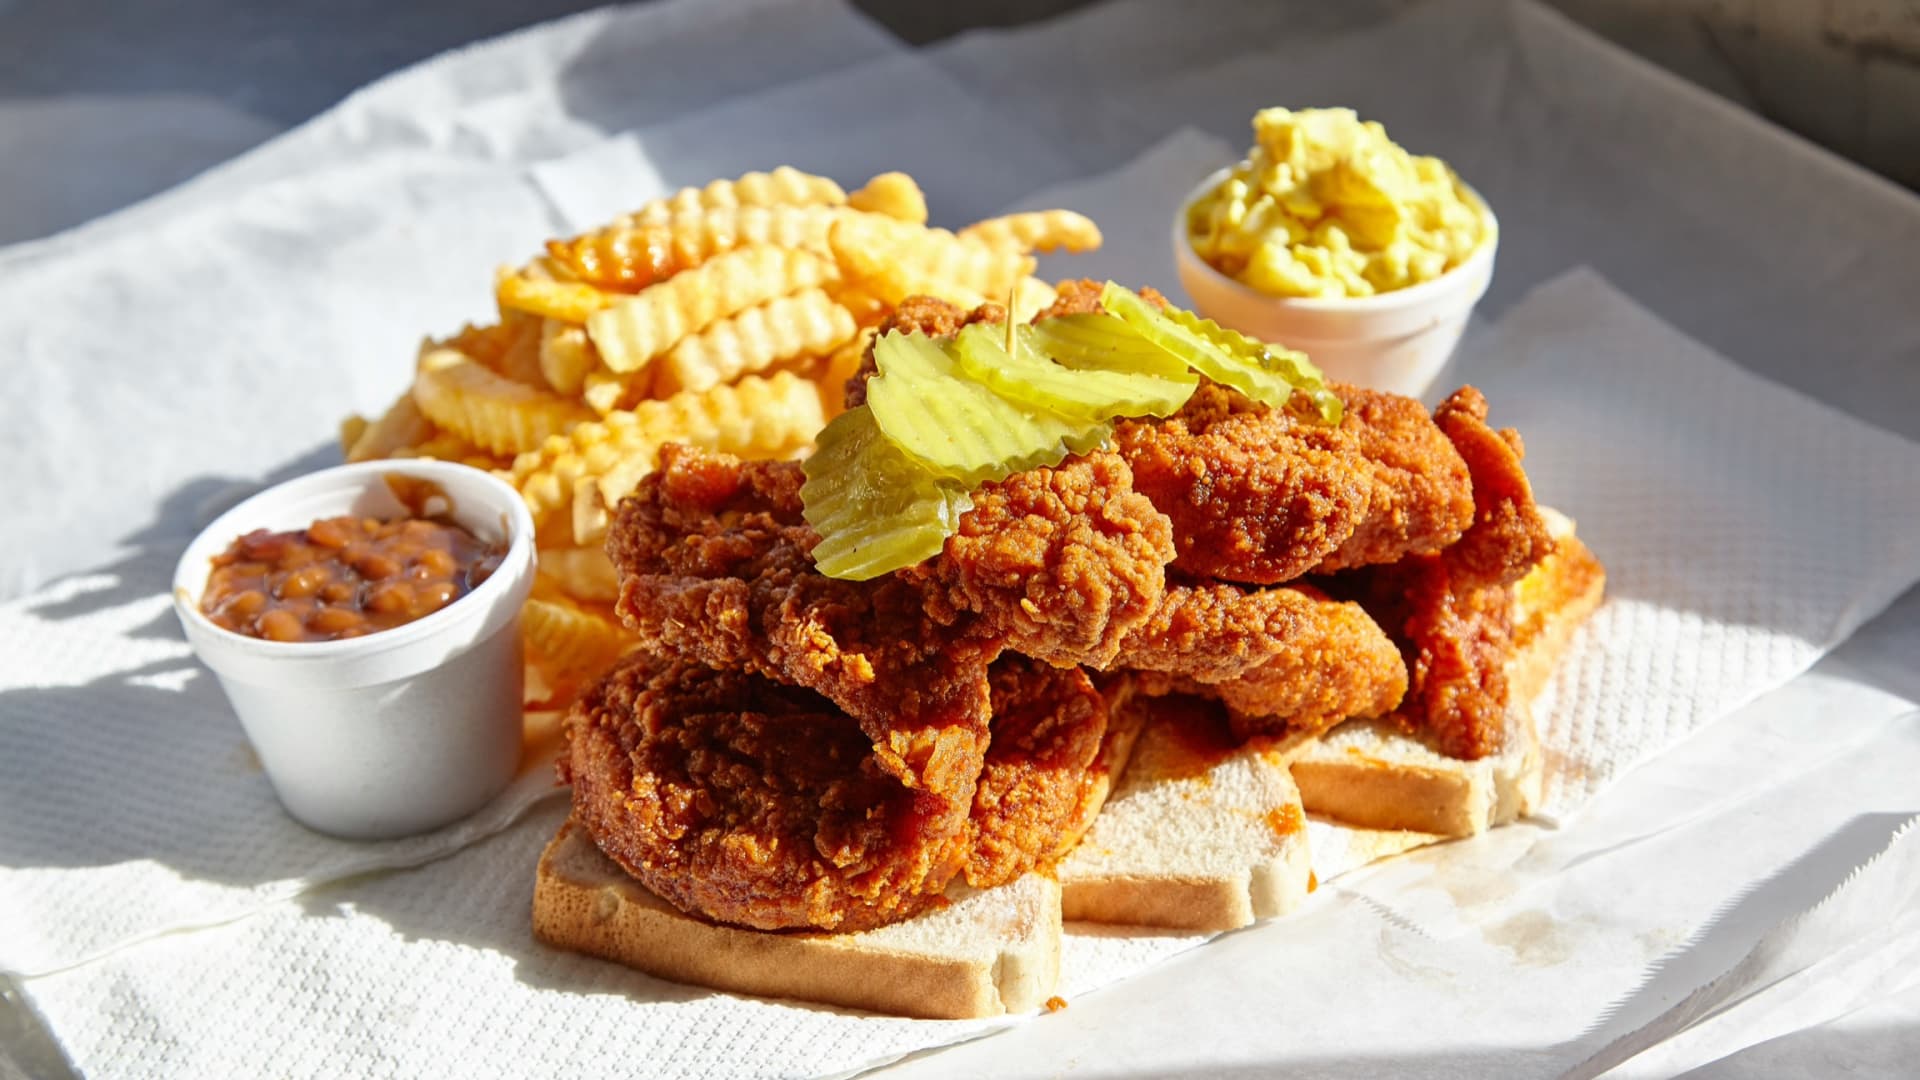 Nashville scorching hen is in all places, however it’s nonetheless on the coronary heart of its hometown’s tradition